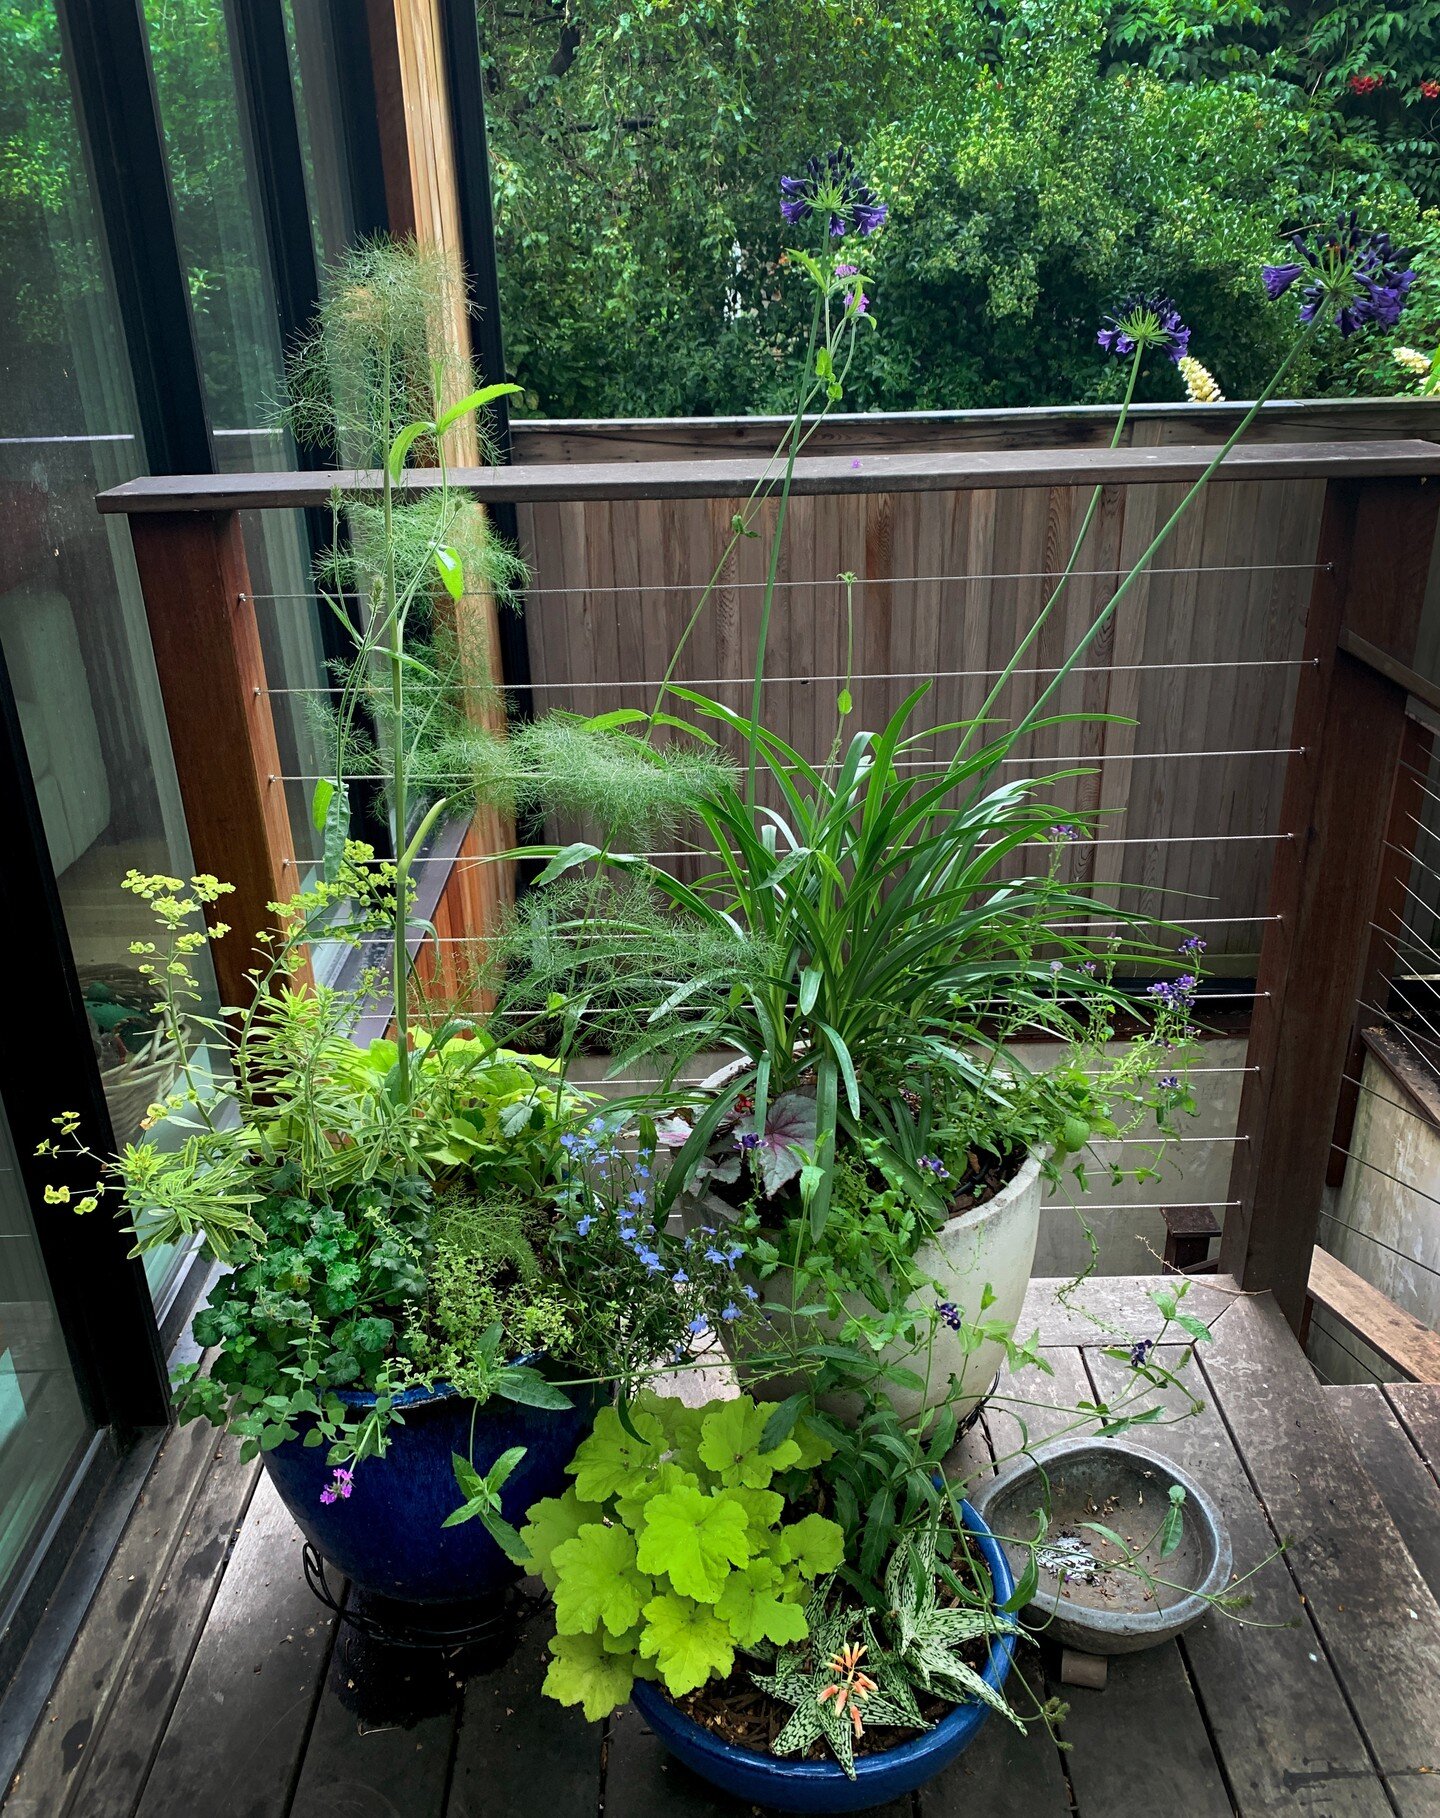 One year and change after install, this Carroll Gardens project is filling in beautifully. I love watching plants grow over time and if you listen carefully, through trial and error, you can learn how they communicate.

Weaving textures and monochrom